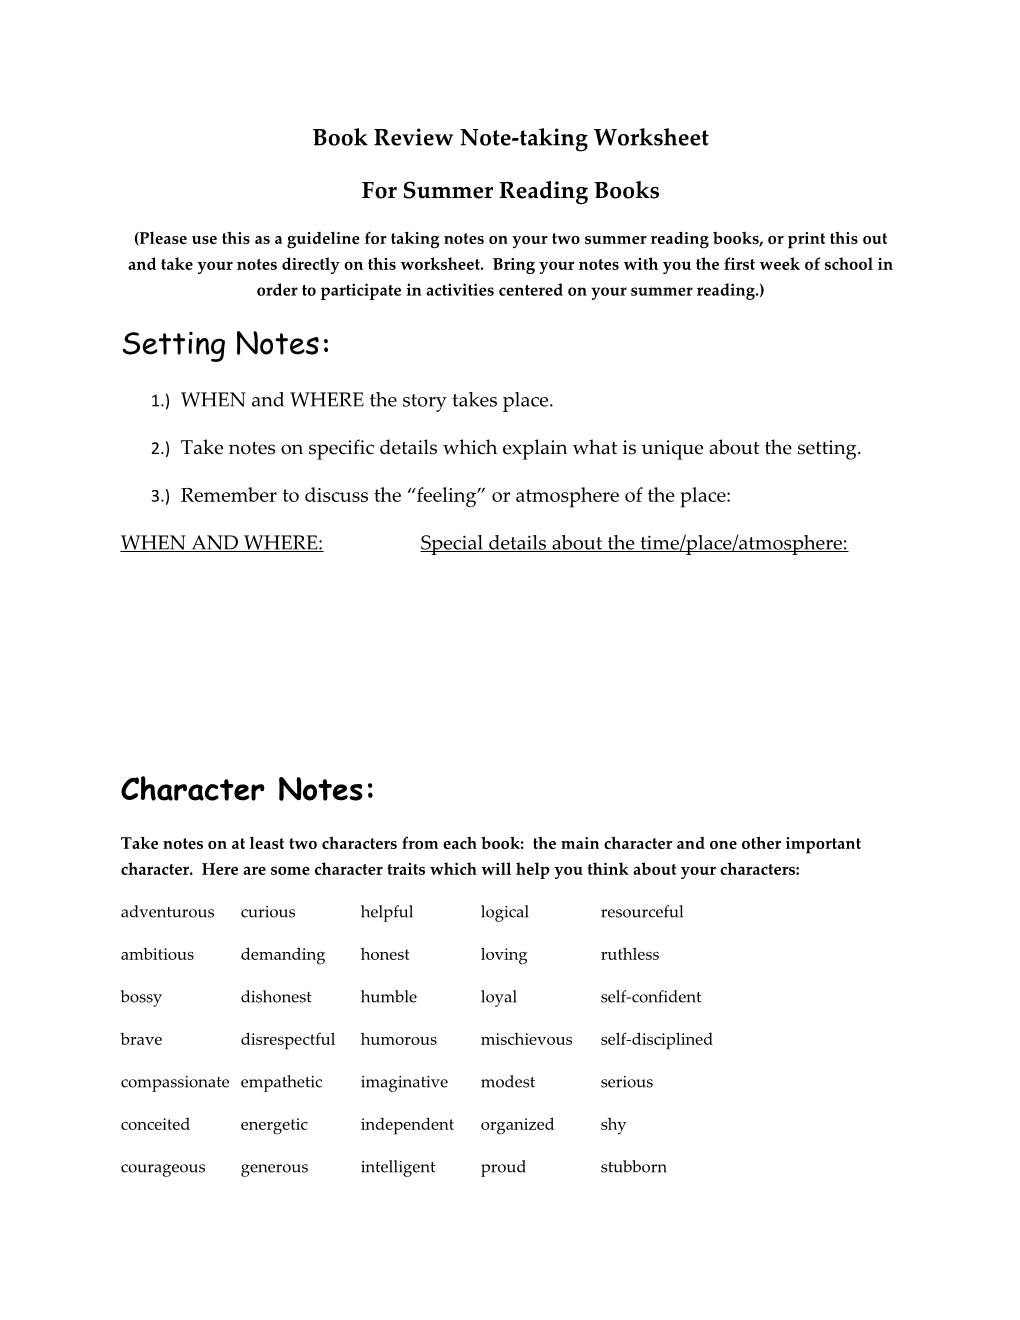 Book Review Note-Taking Worksheet